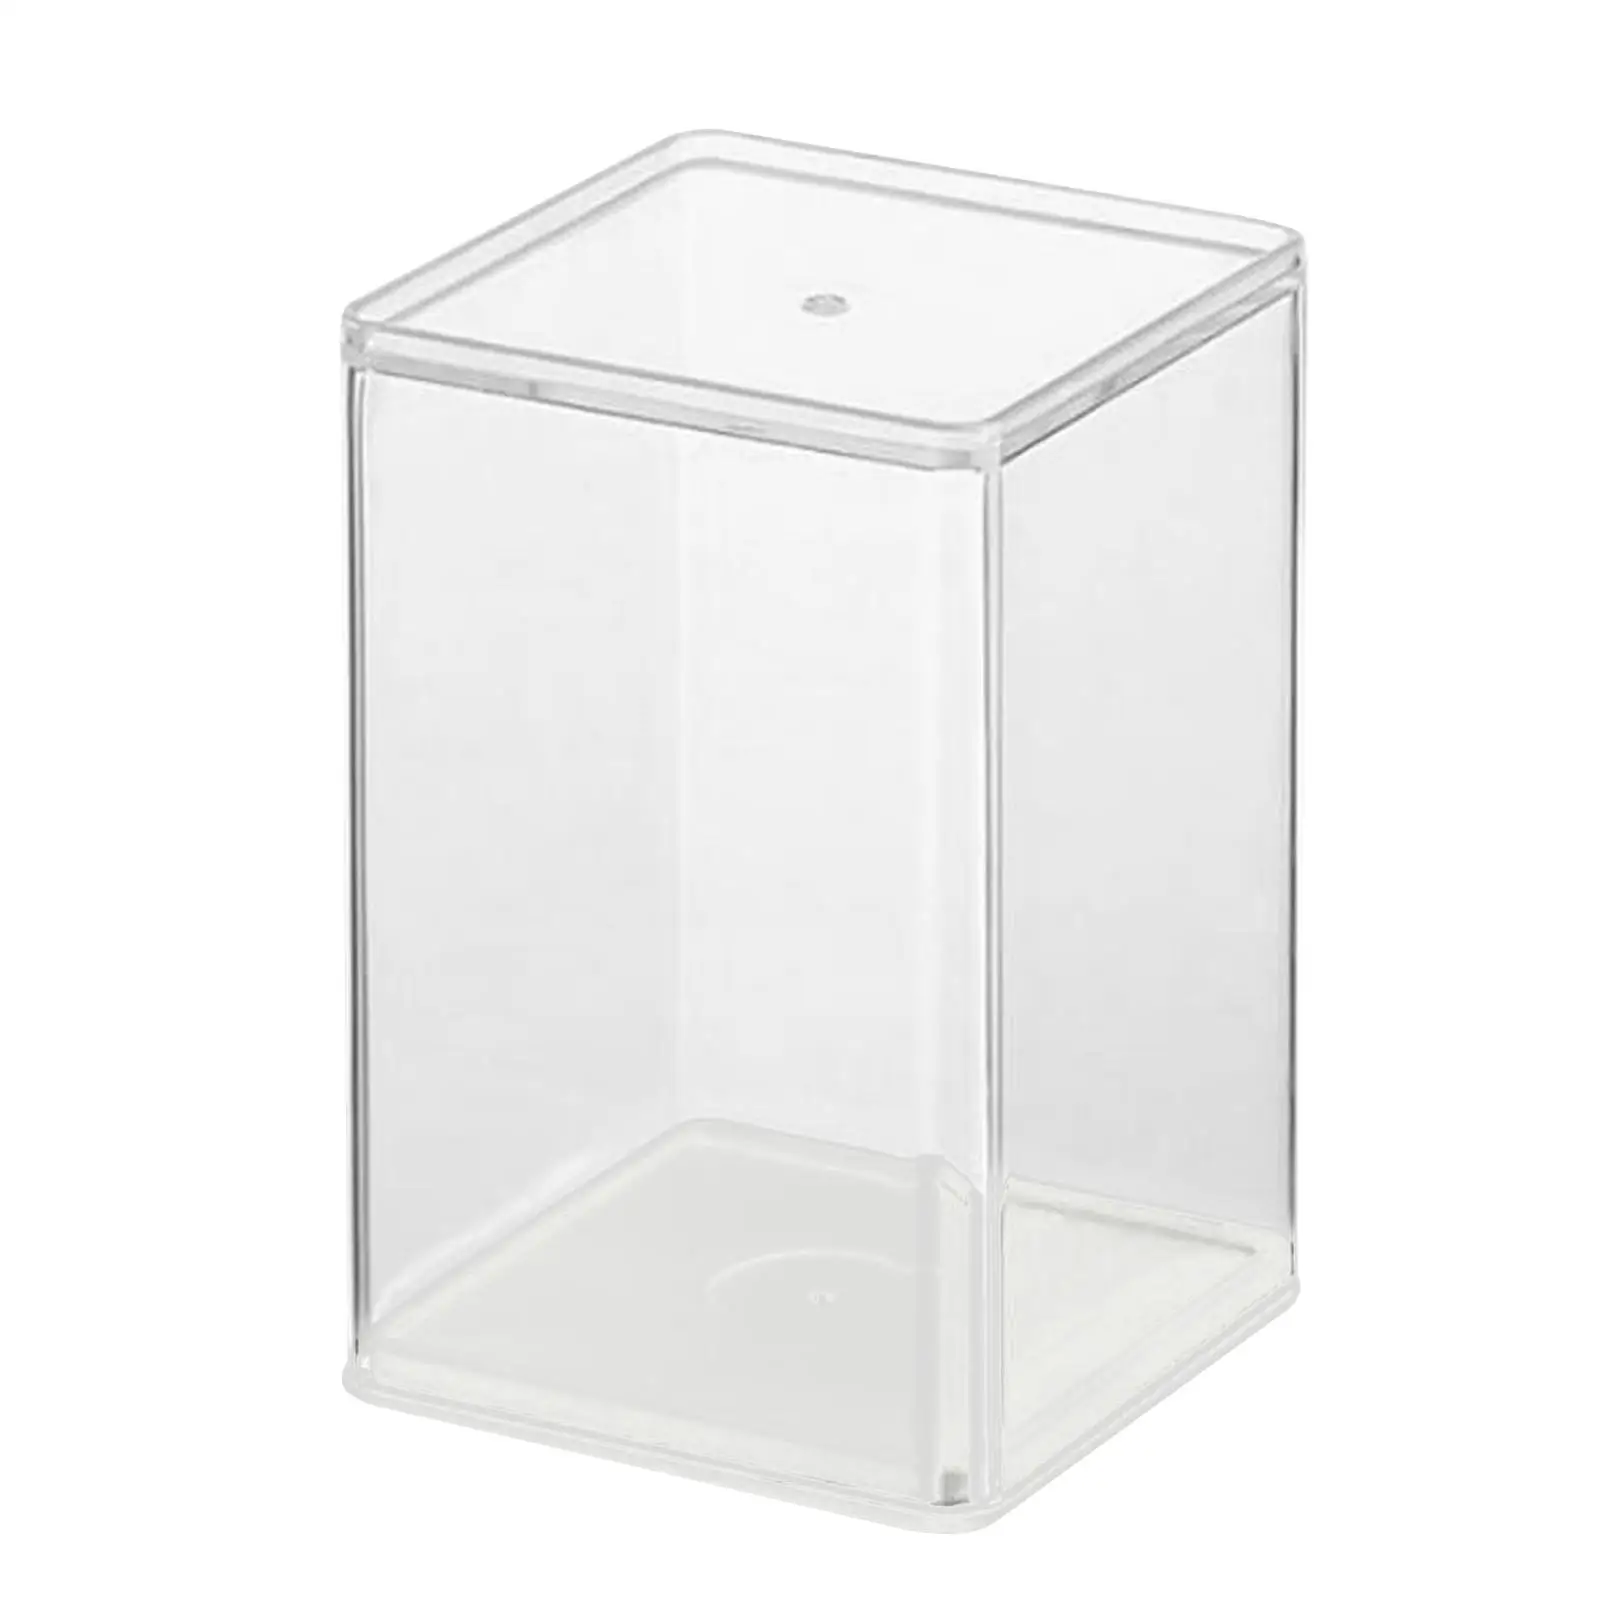 Transparent Acrylic Display Rack Container Dustproof Vertical Storage Box Dust Cabinet Protector for Toys Action Figures Adult